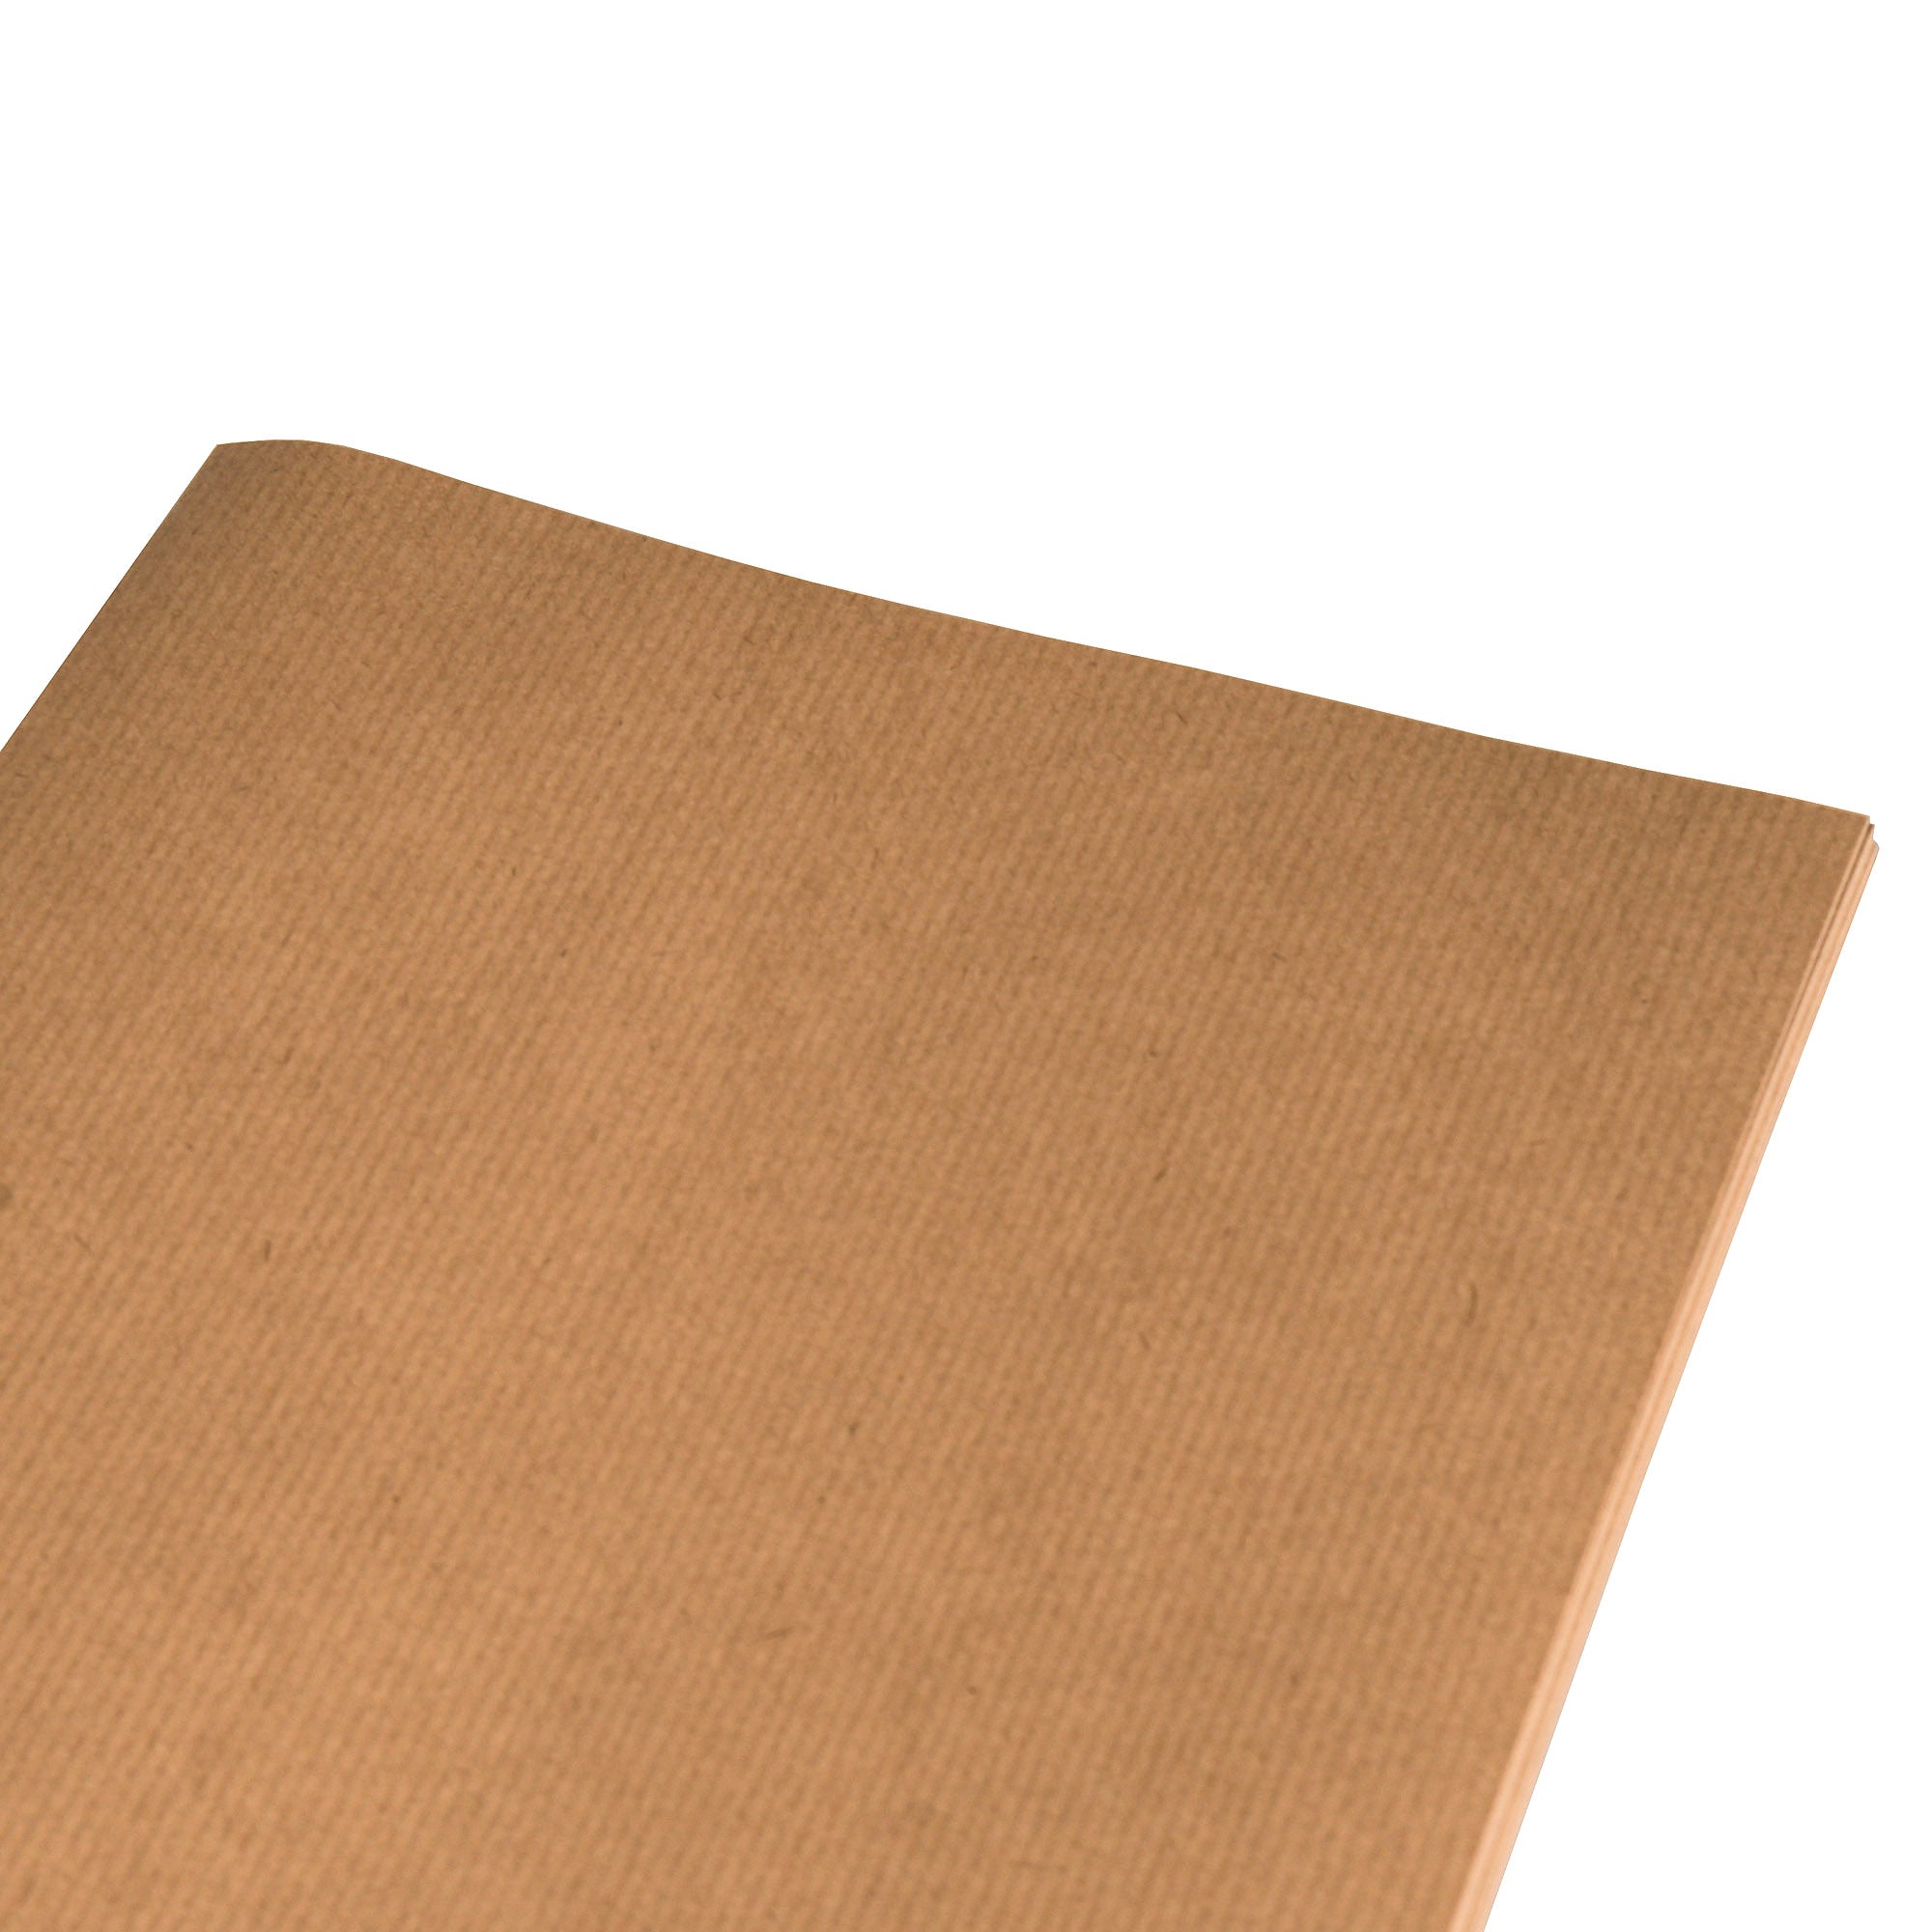 Self-adhesive kraft paper A4 210x297mm 50 sheets smooth paper - MD Labels